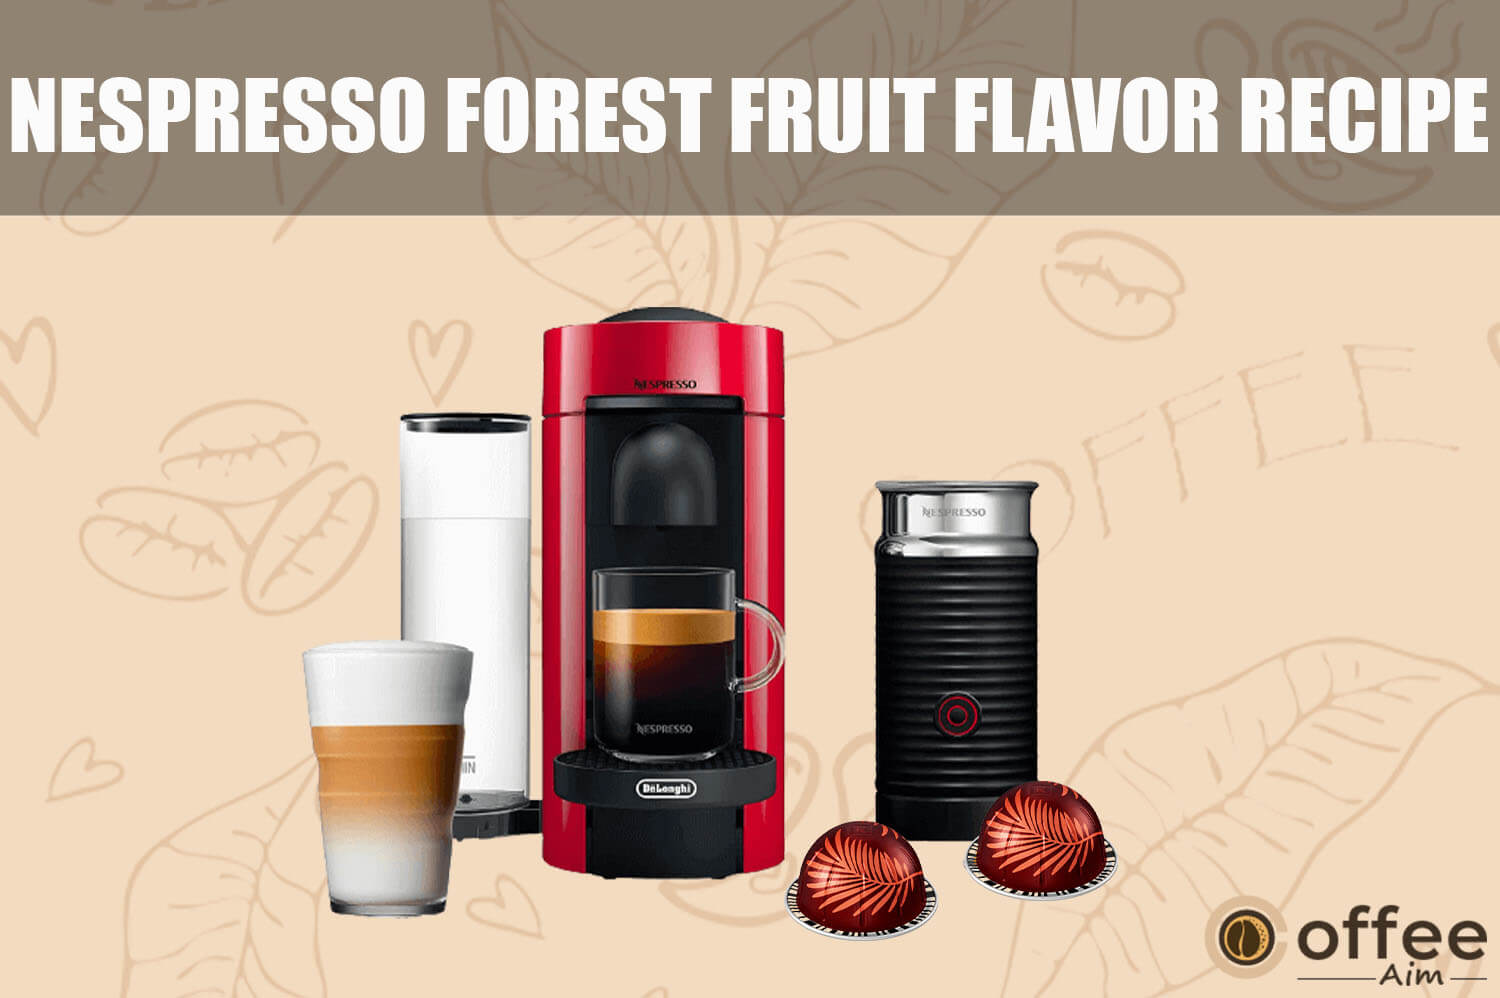 Featured image for the article "Nespresso Forest Fruit Flavor Recipe"